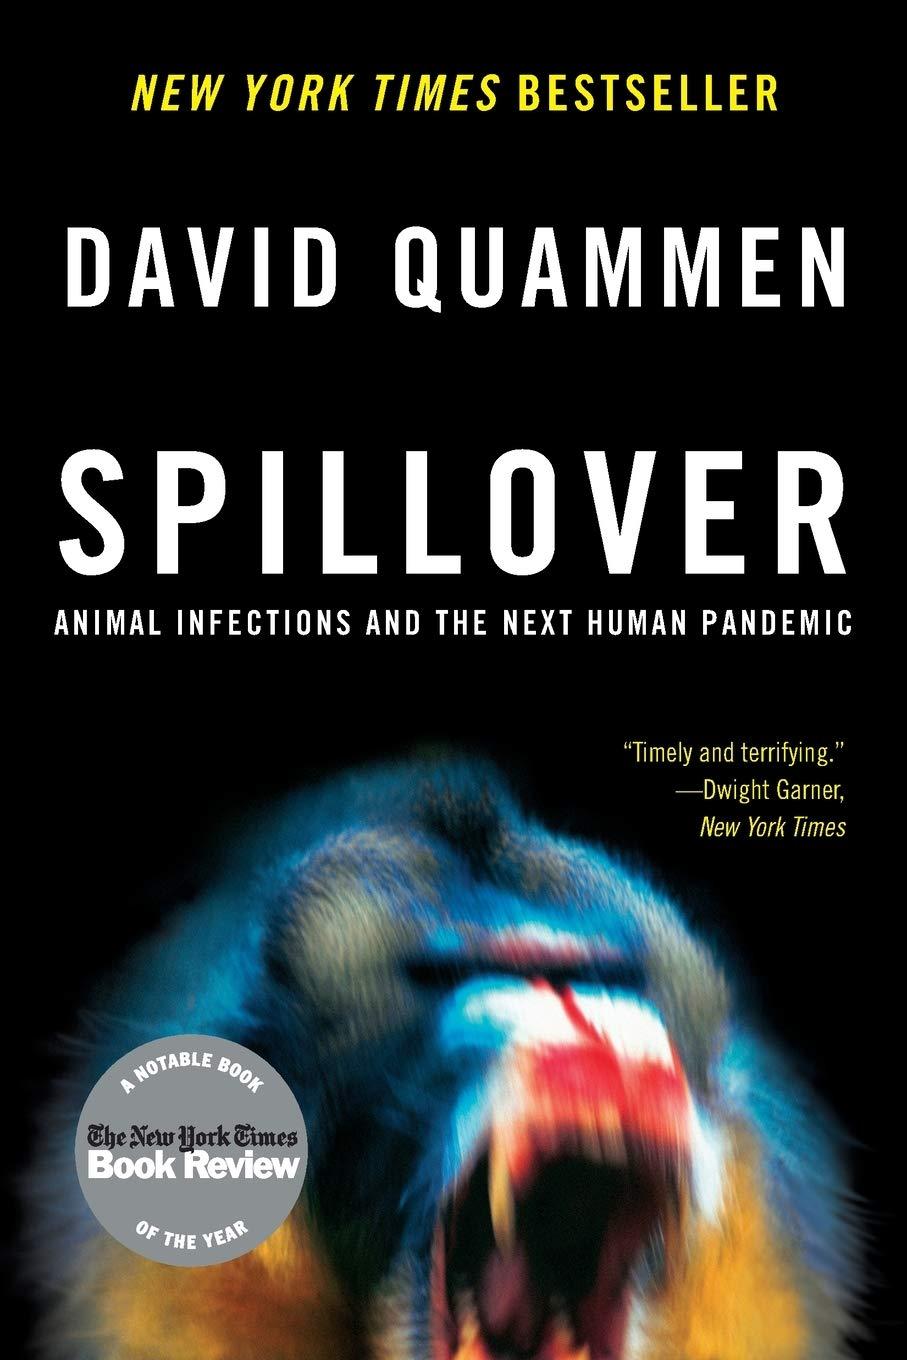 Spillover, Animal Infections and the Next Human Pandemic - David Quammen.